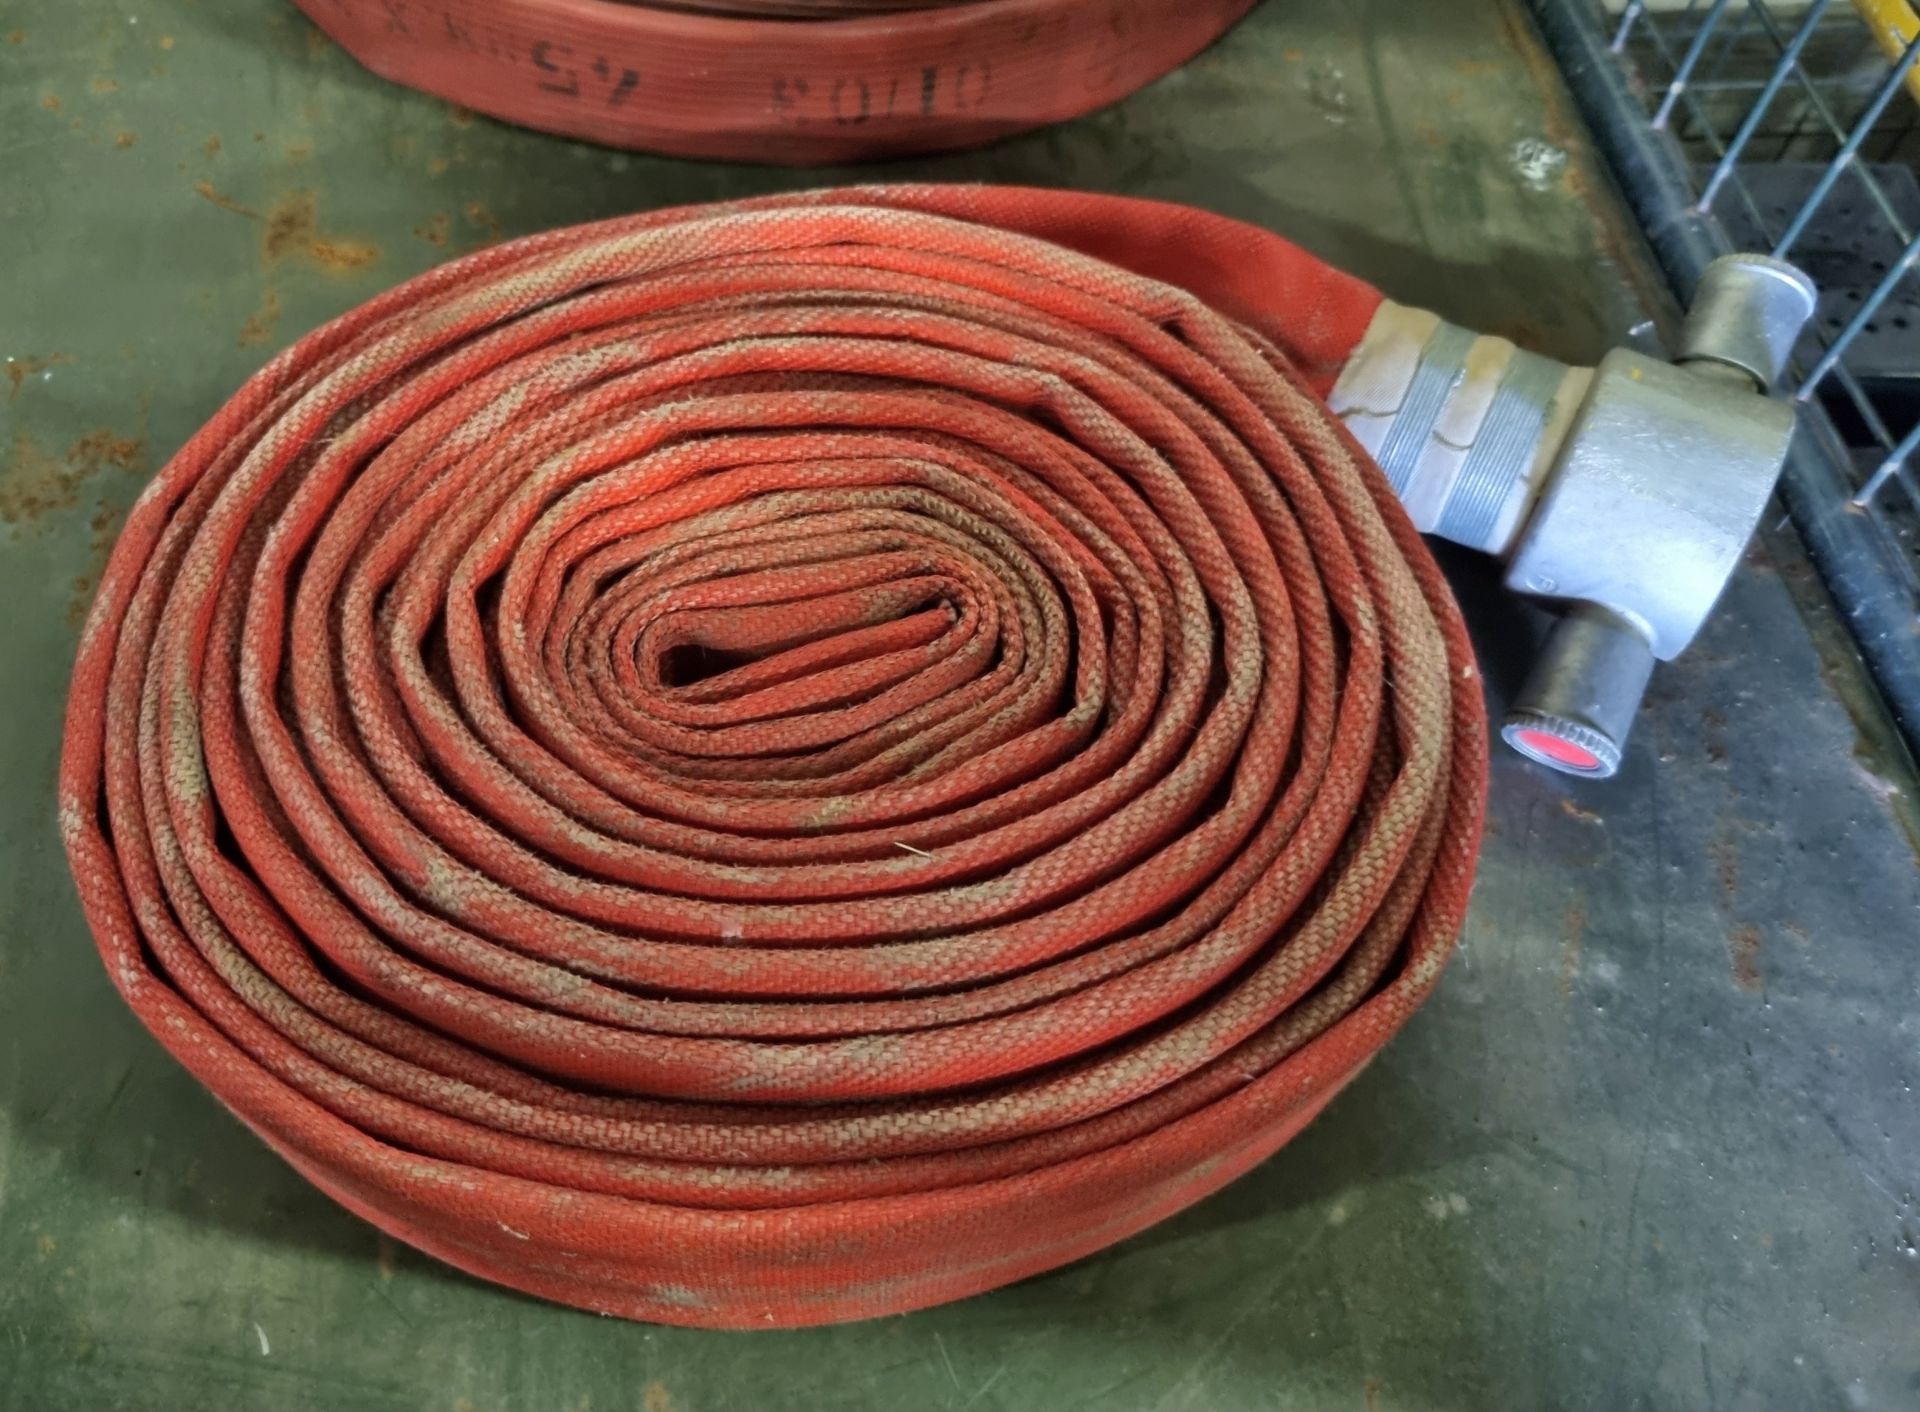 2x Angus Duraline 45mm lay flat hoses with couplings - approx 23m in length, Red lay flat hose - Bild 3 aus 4